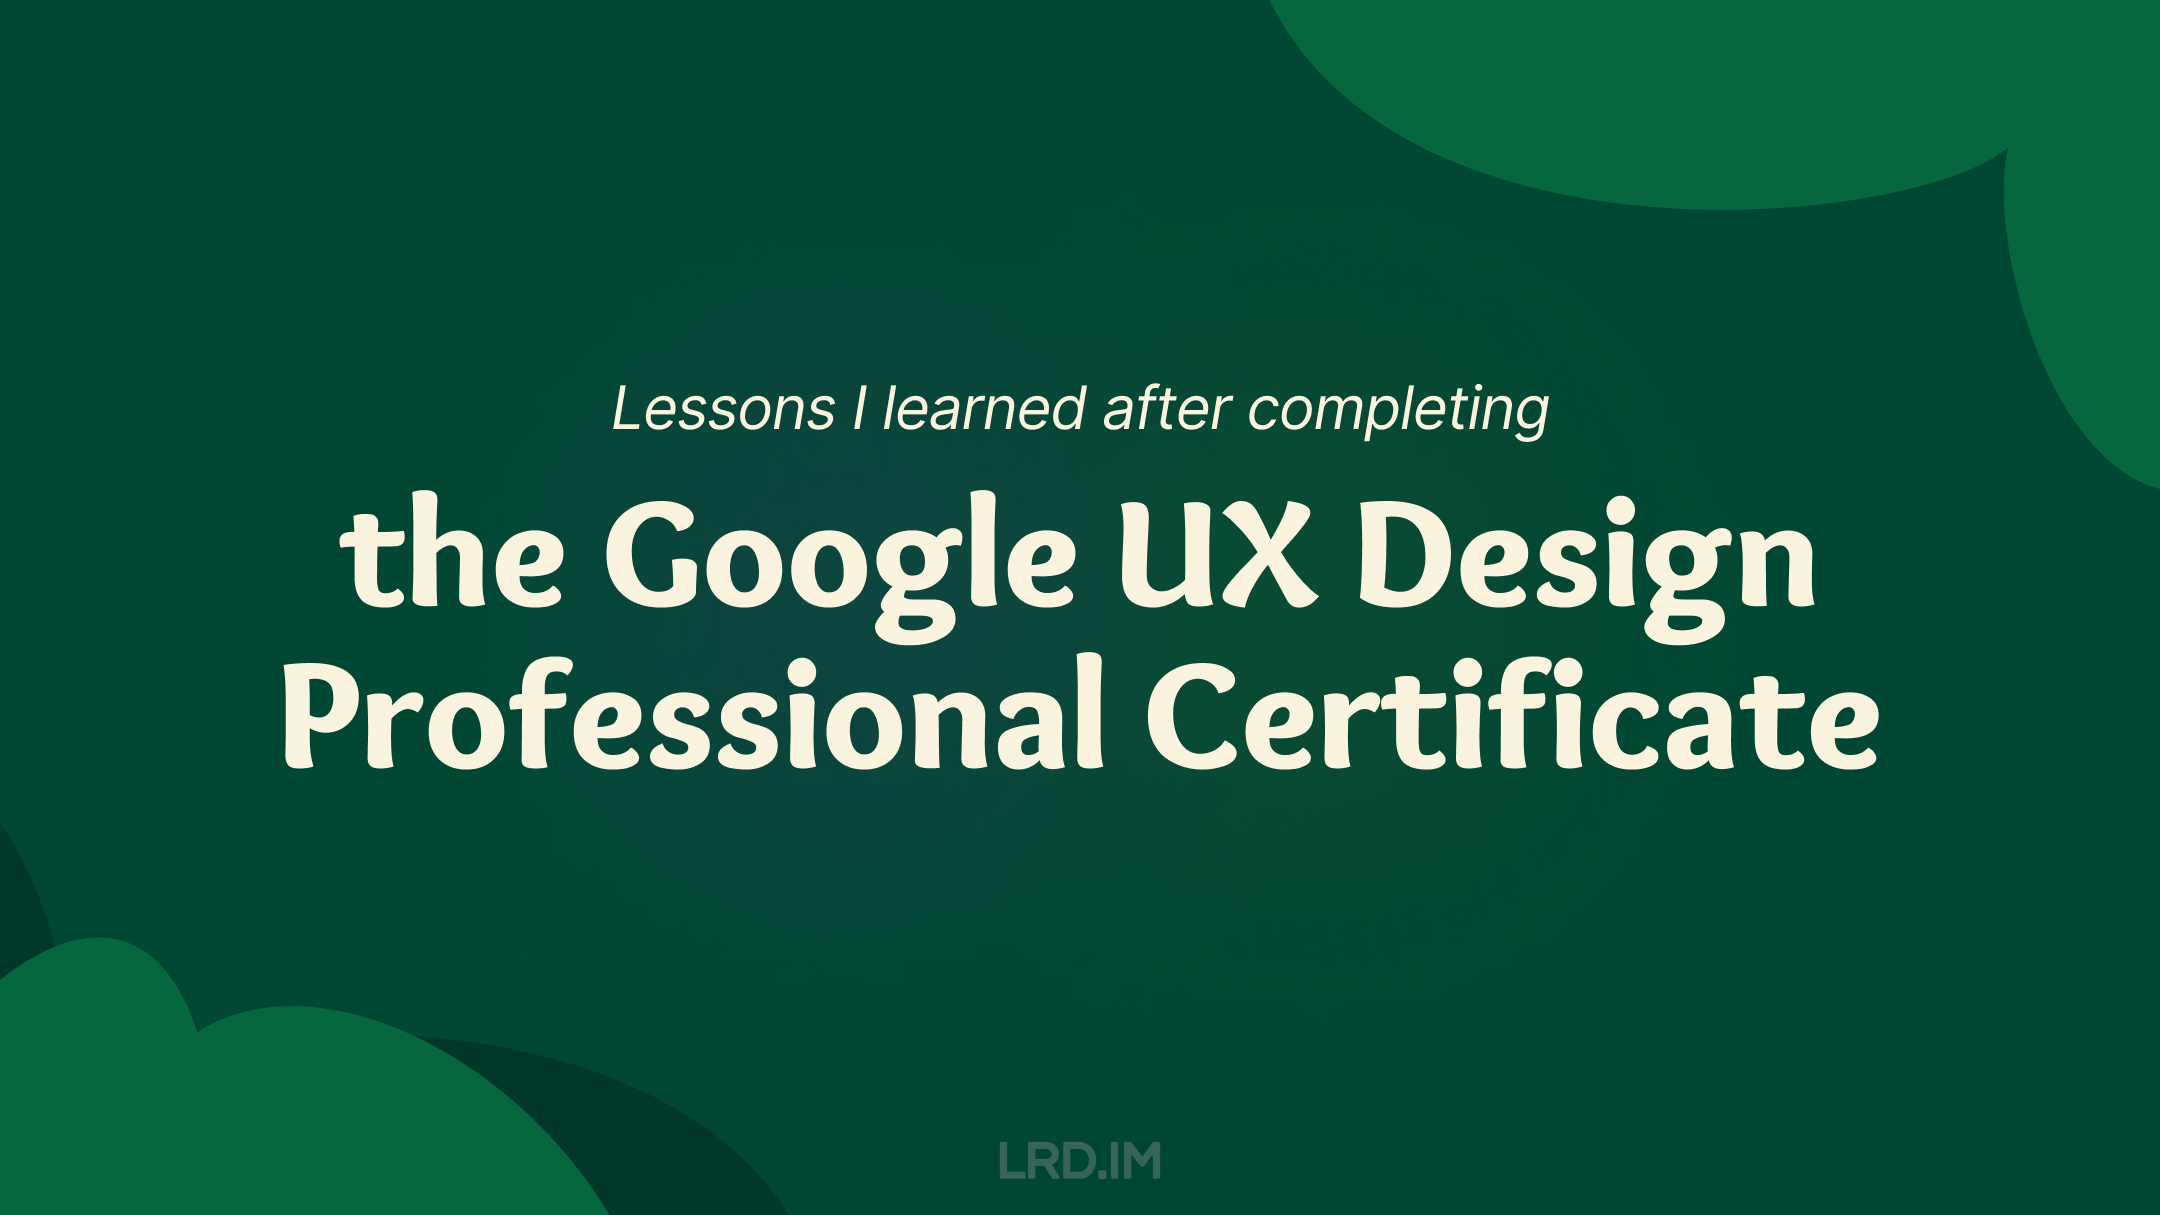 The image is a presentation slide with a dark green background and white text. The text reads “Lessons I learned after completing the Google UX Design Professional Certificate.” The logo “LRD.IM” is also displayed.